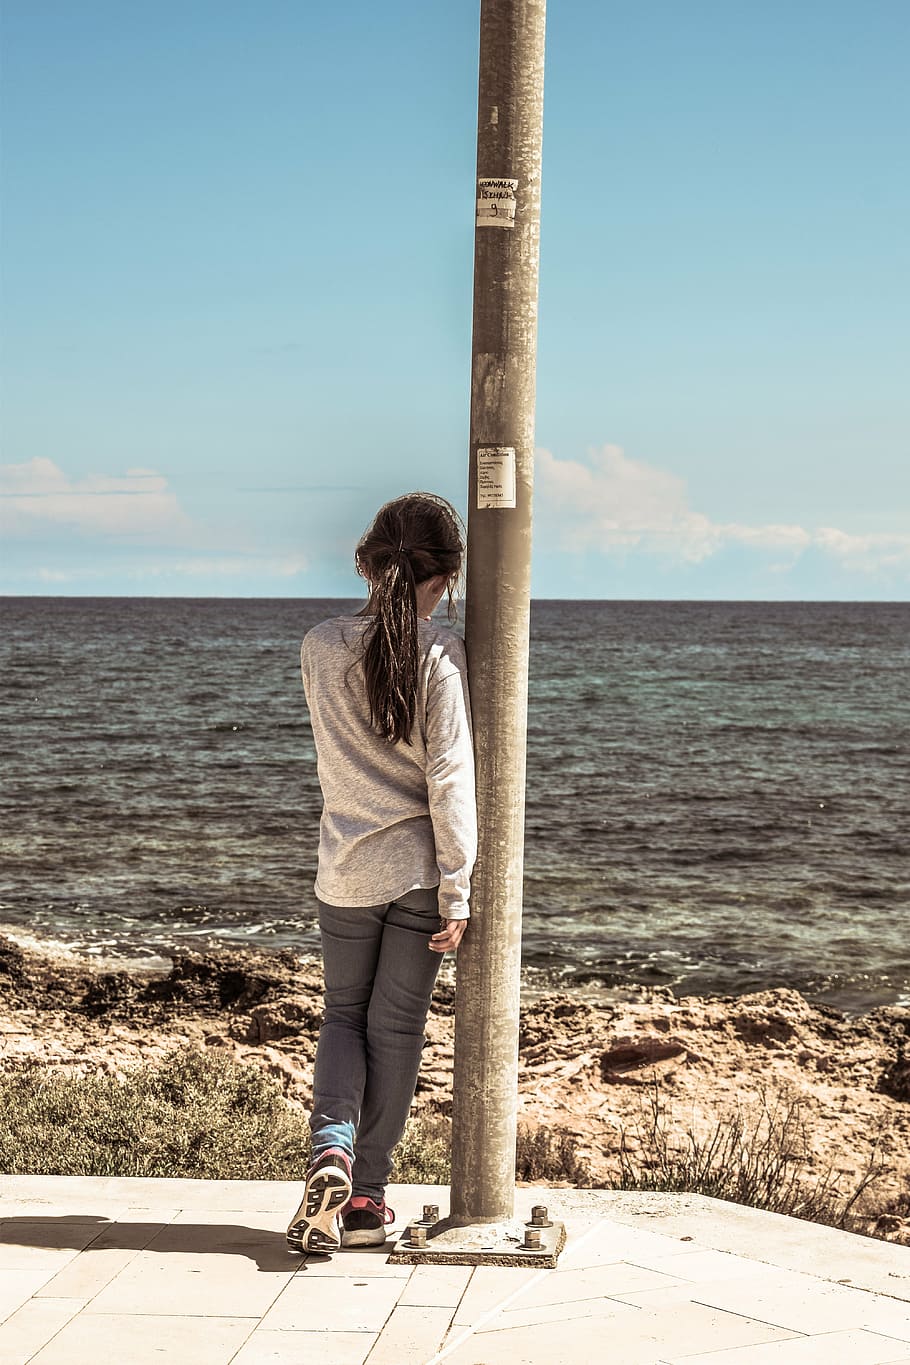 girl, thoughtful, sensitive, sea, childhood, sky, real people, lifestyles, one person, casual clothing